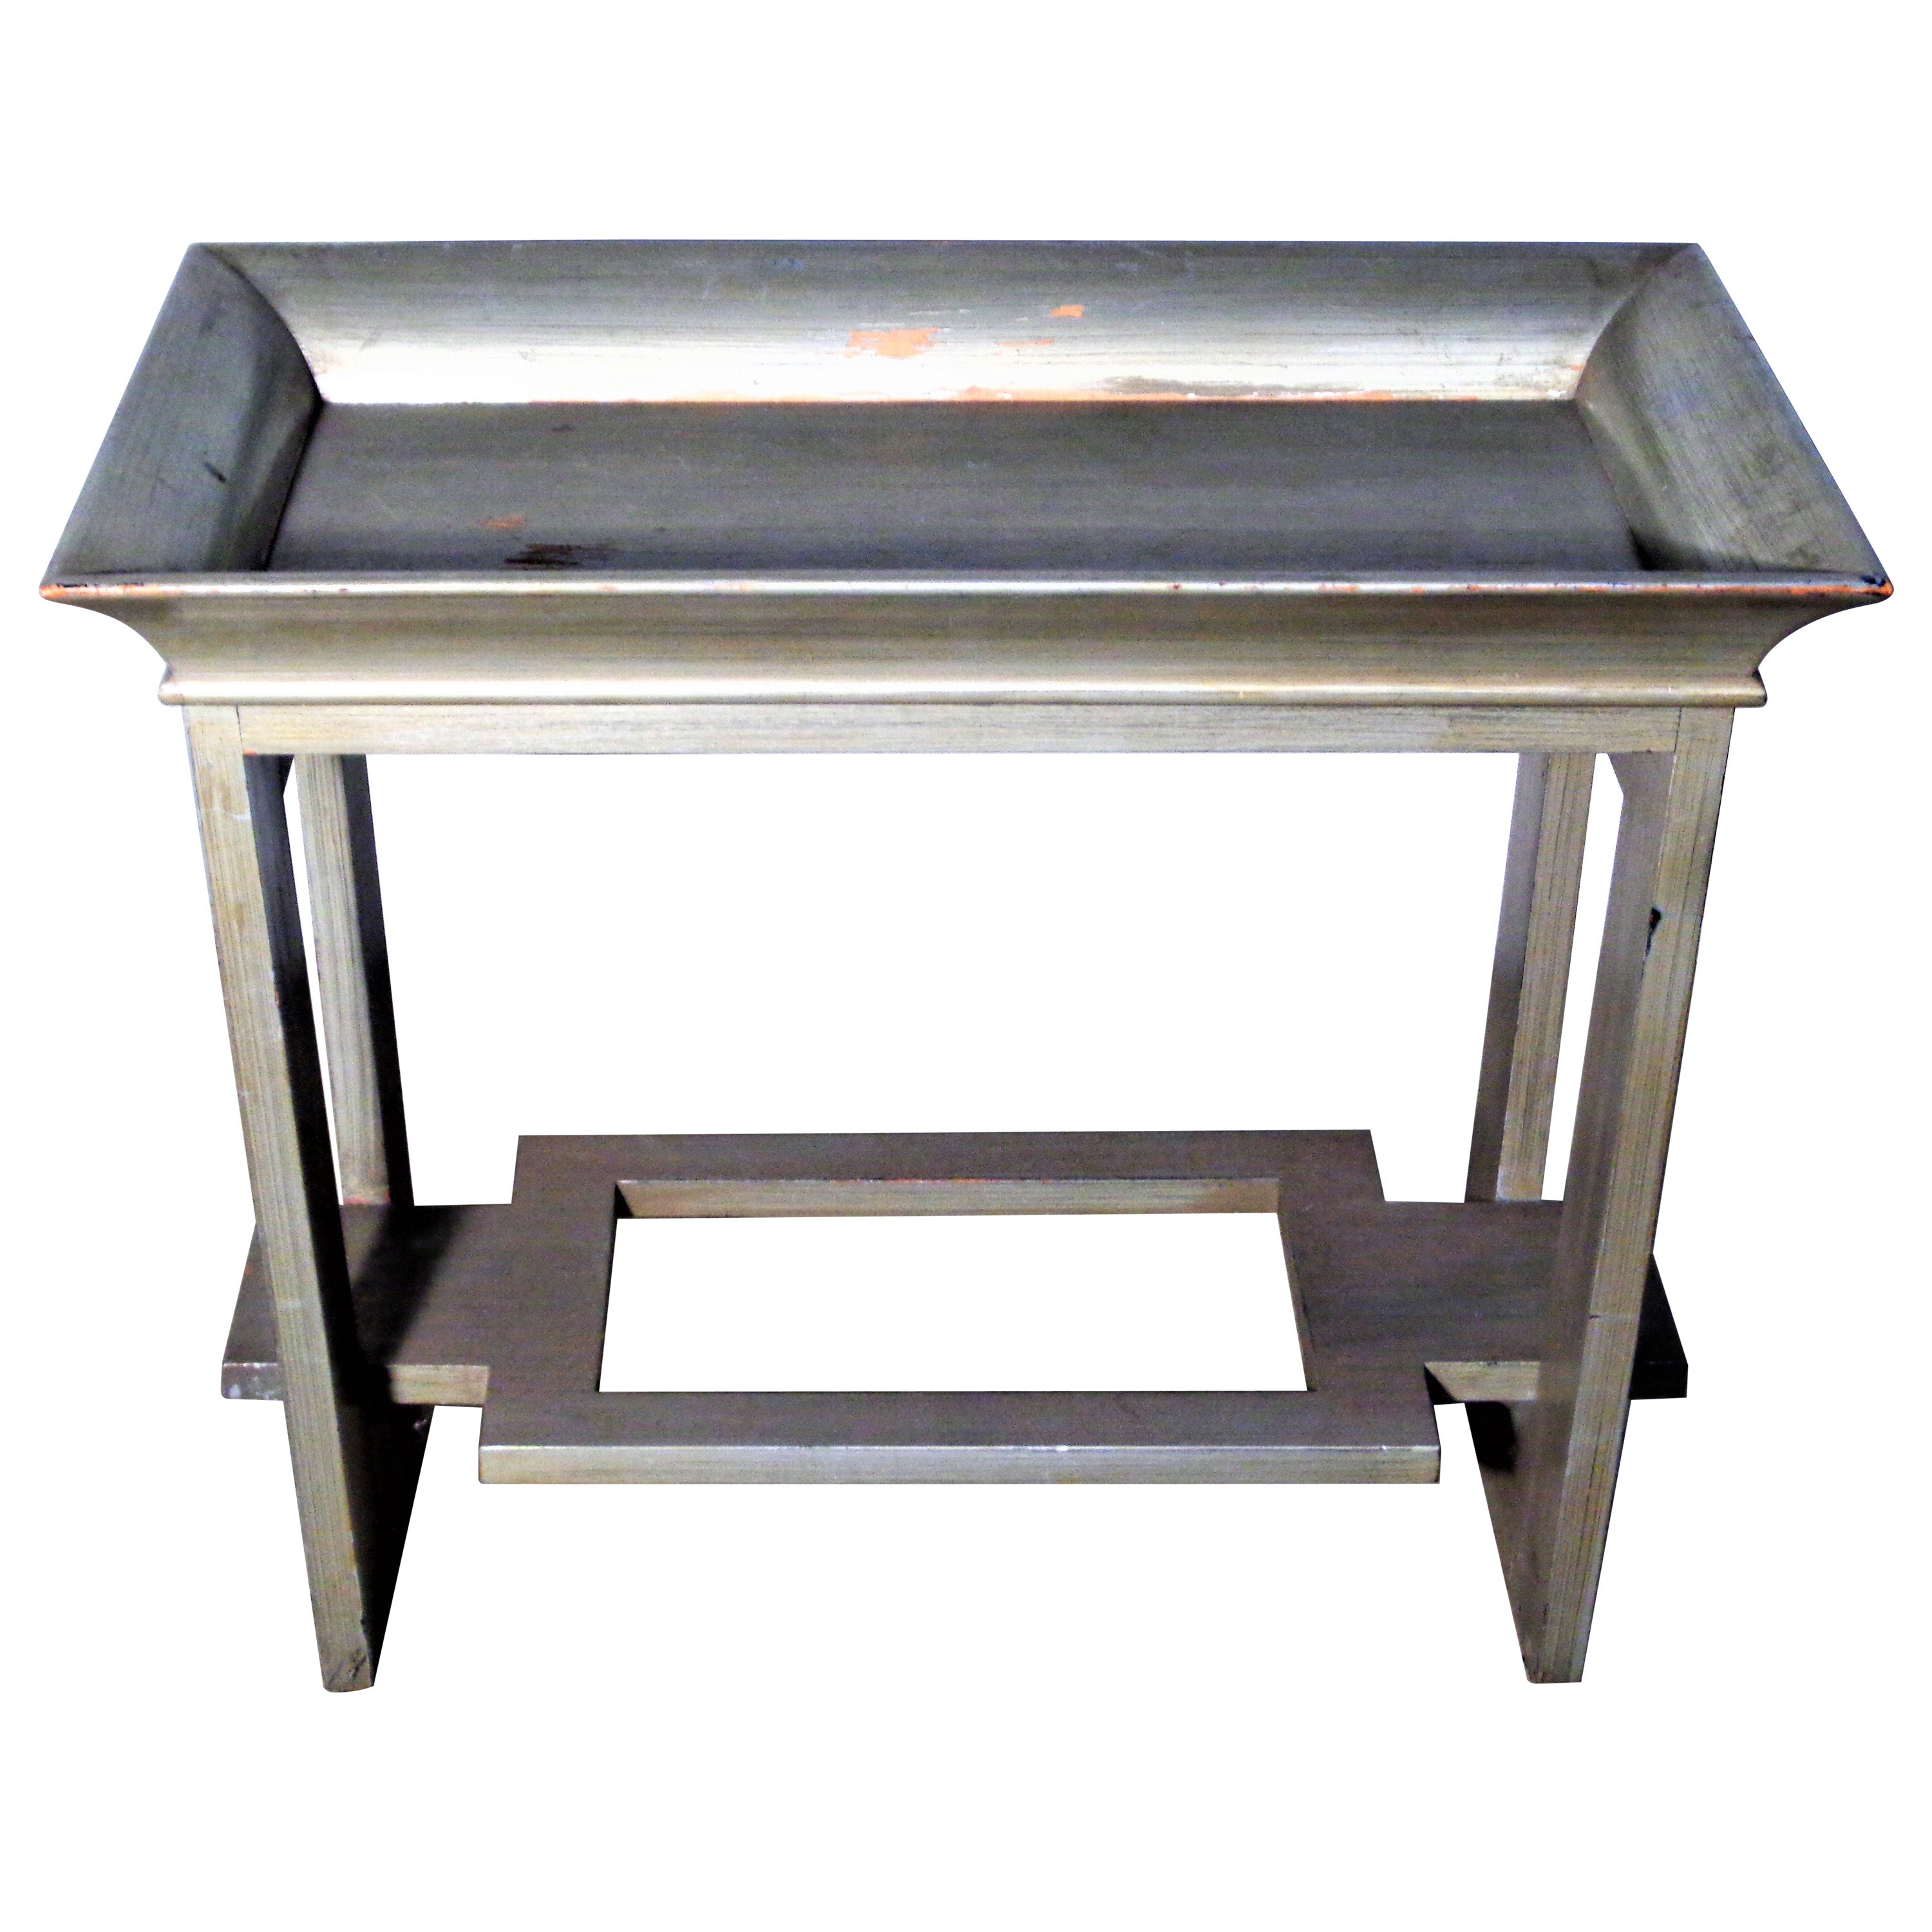 1940's Silver Leaf Tray Top Table